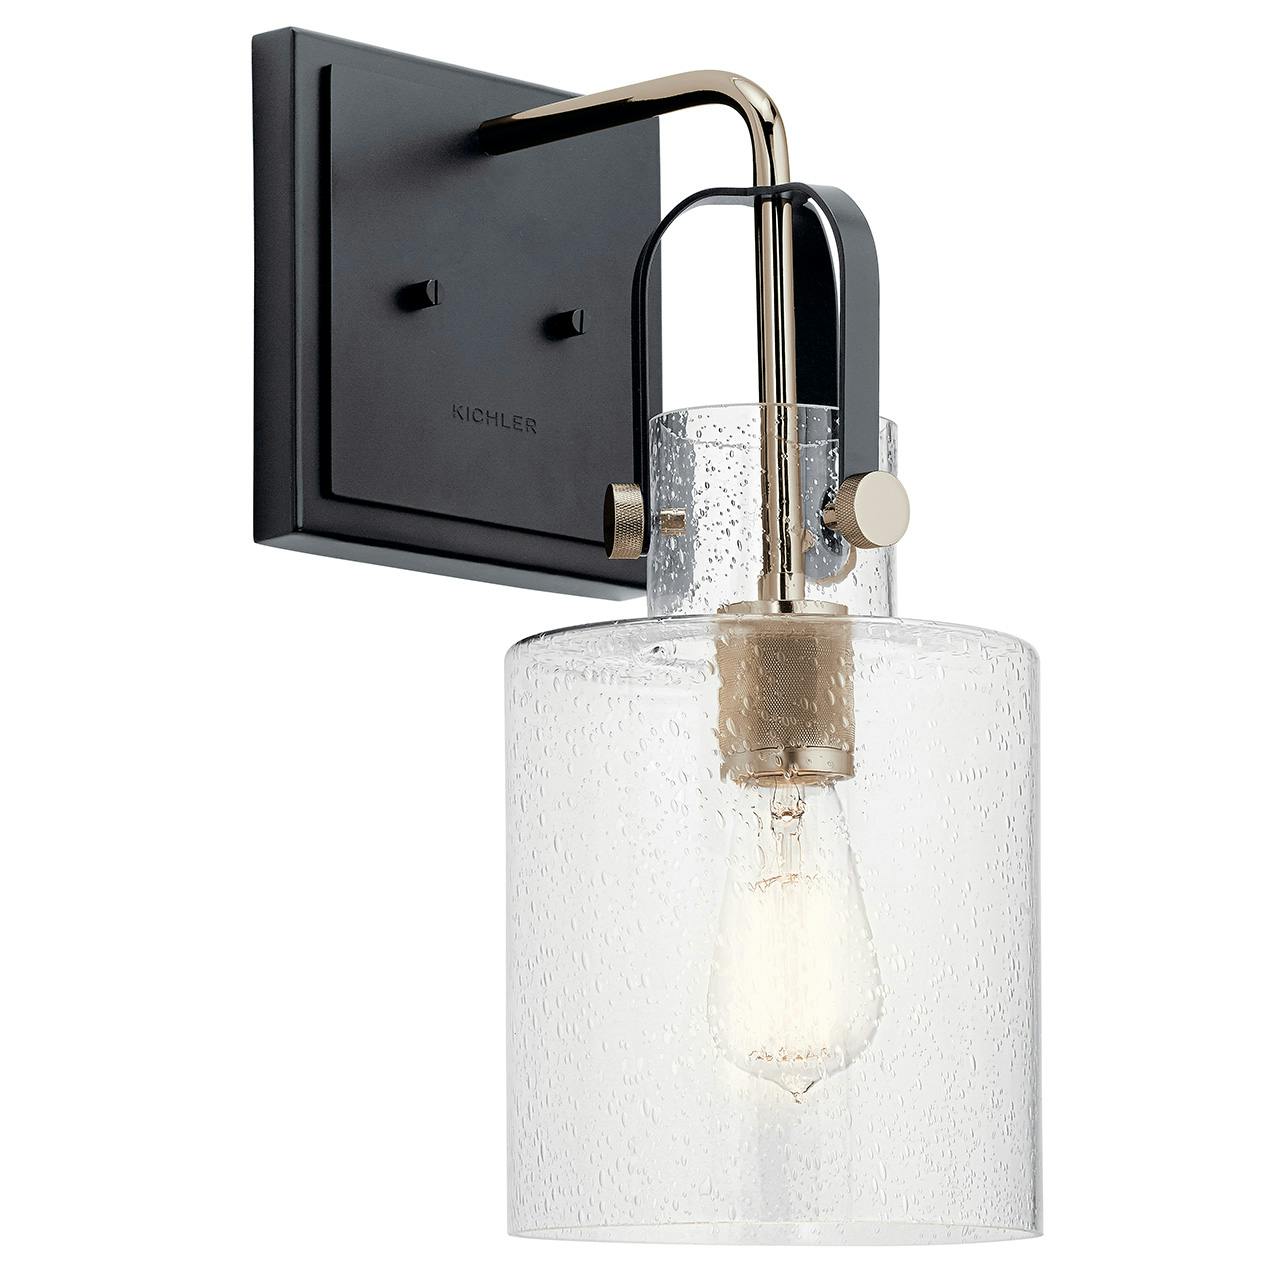 Kitner 16.5" Sconce Black and Nickel on a white background